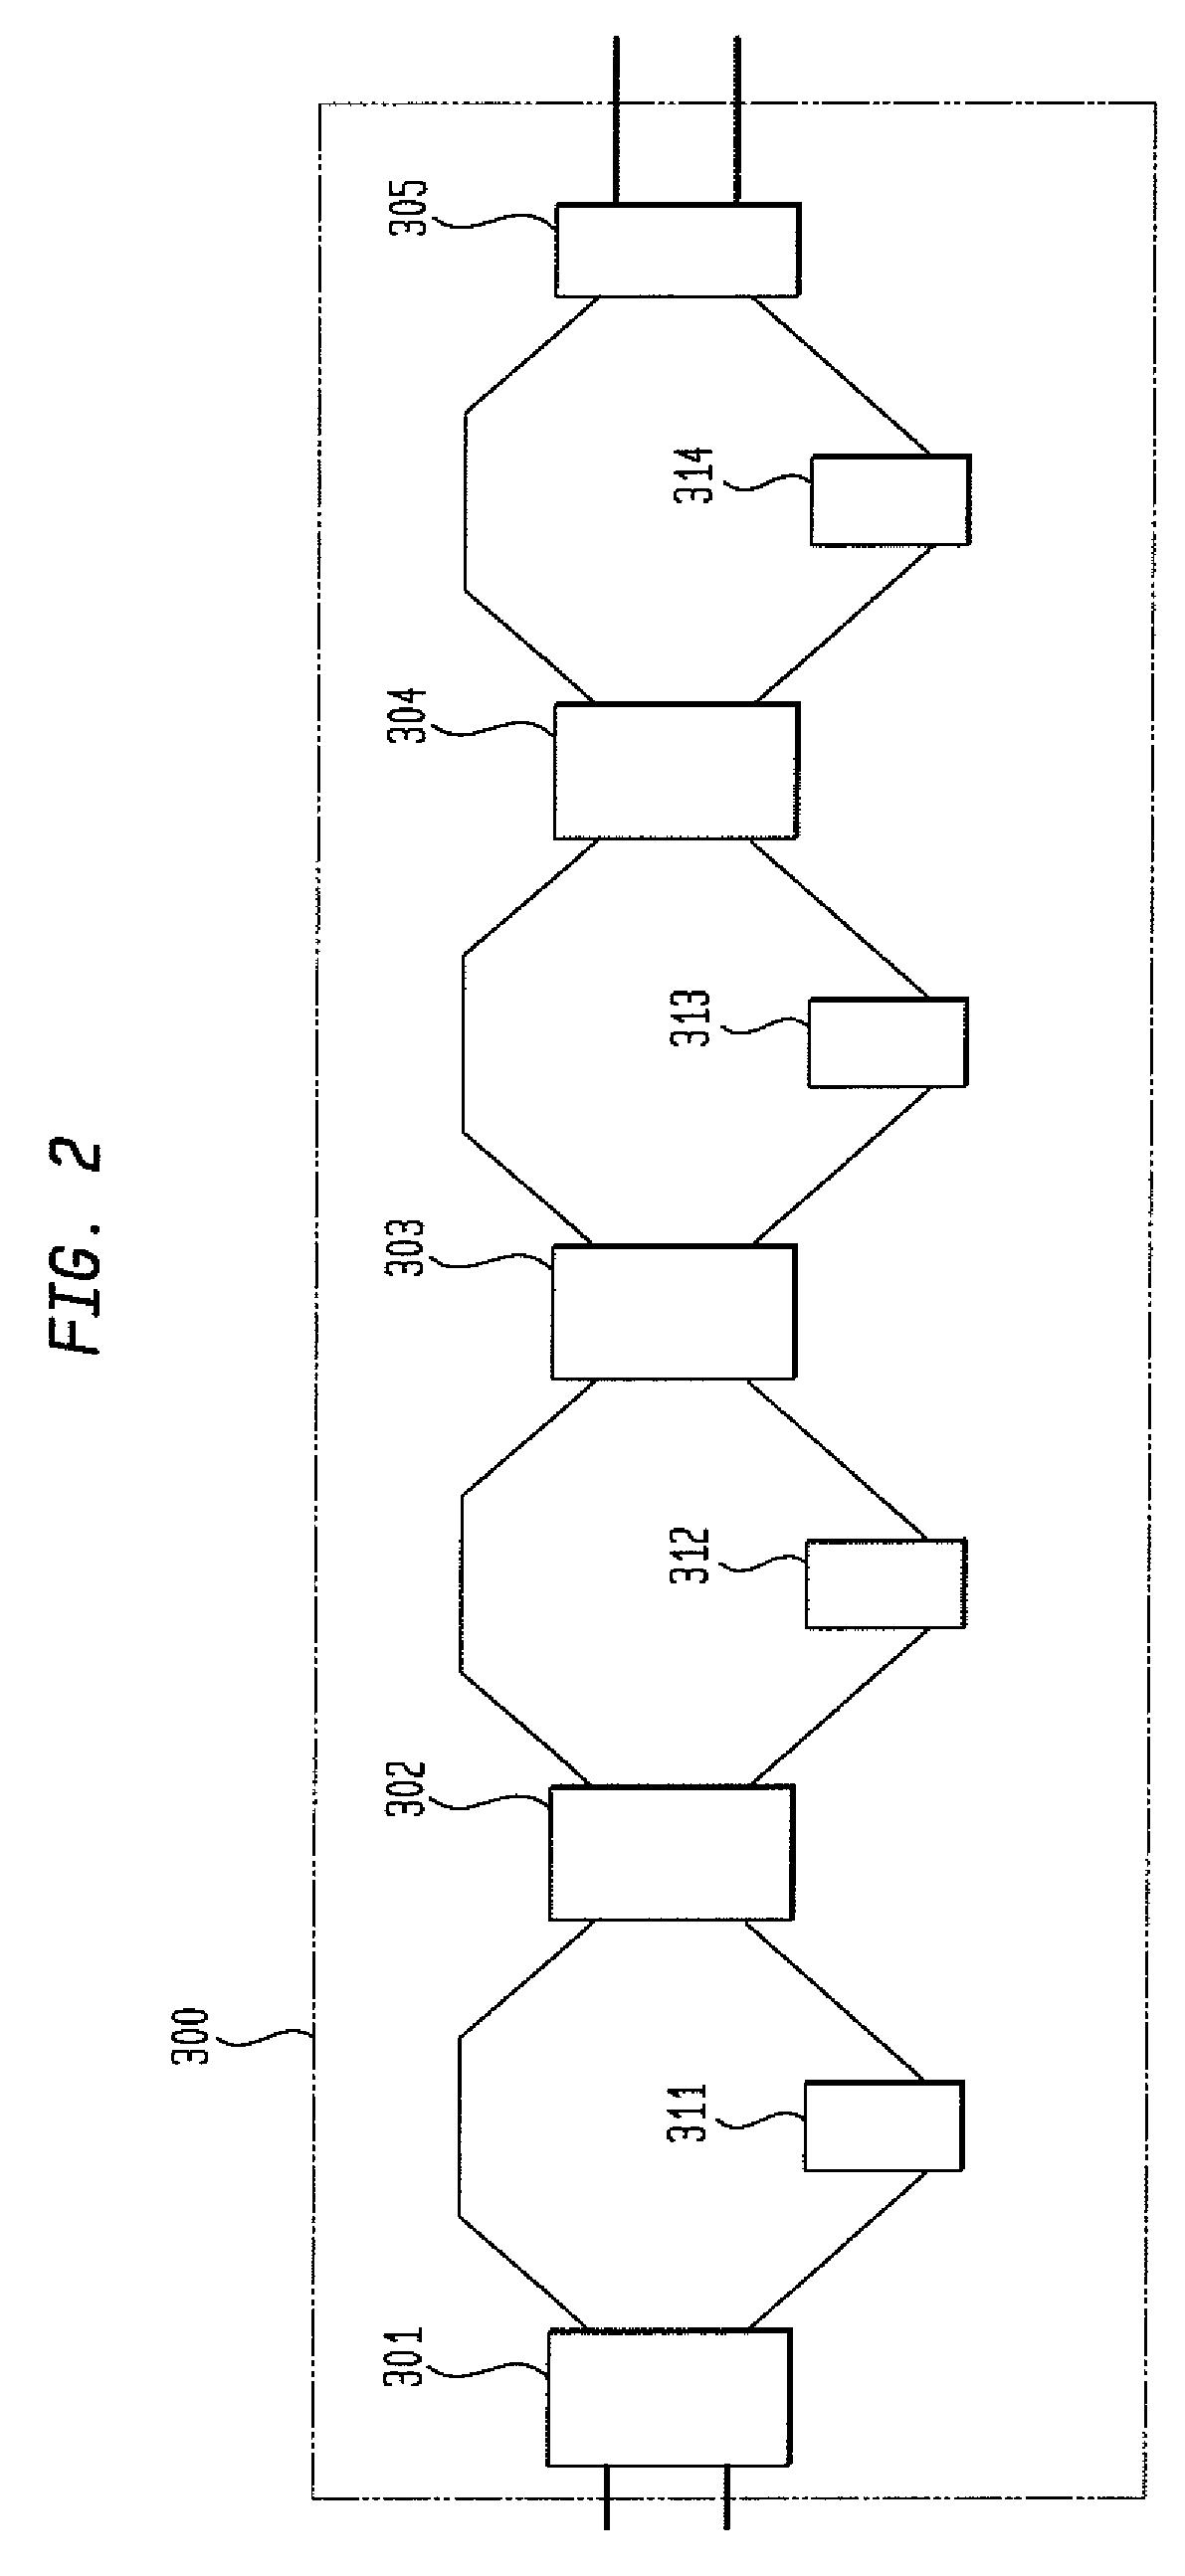 Variable spectral phase encoder/decoder based on decomposition of Hadamard codes